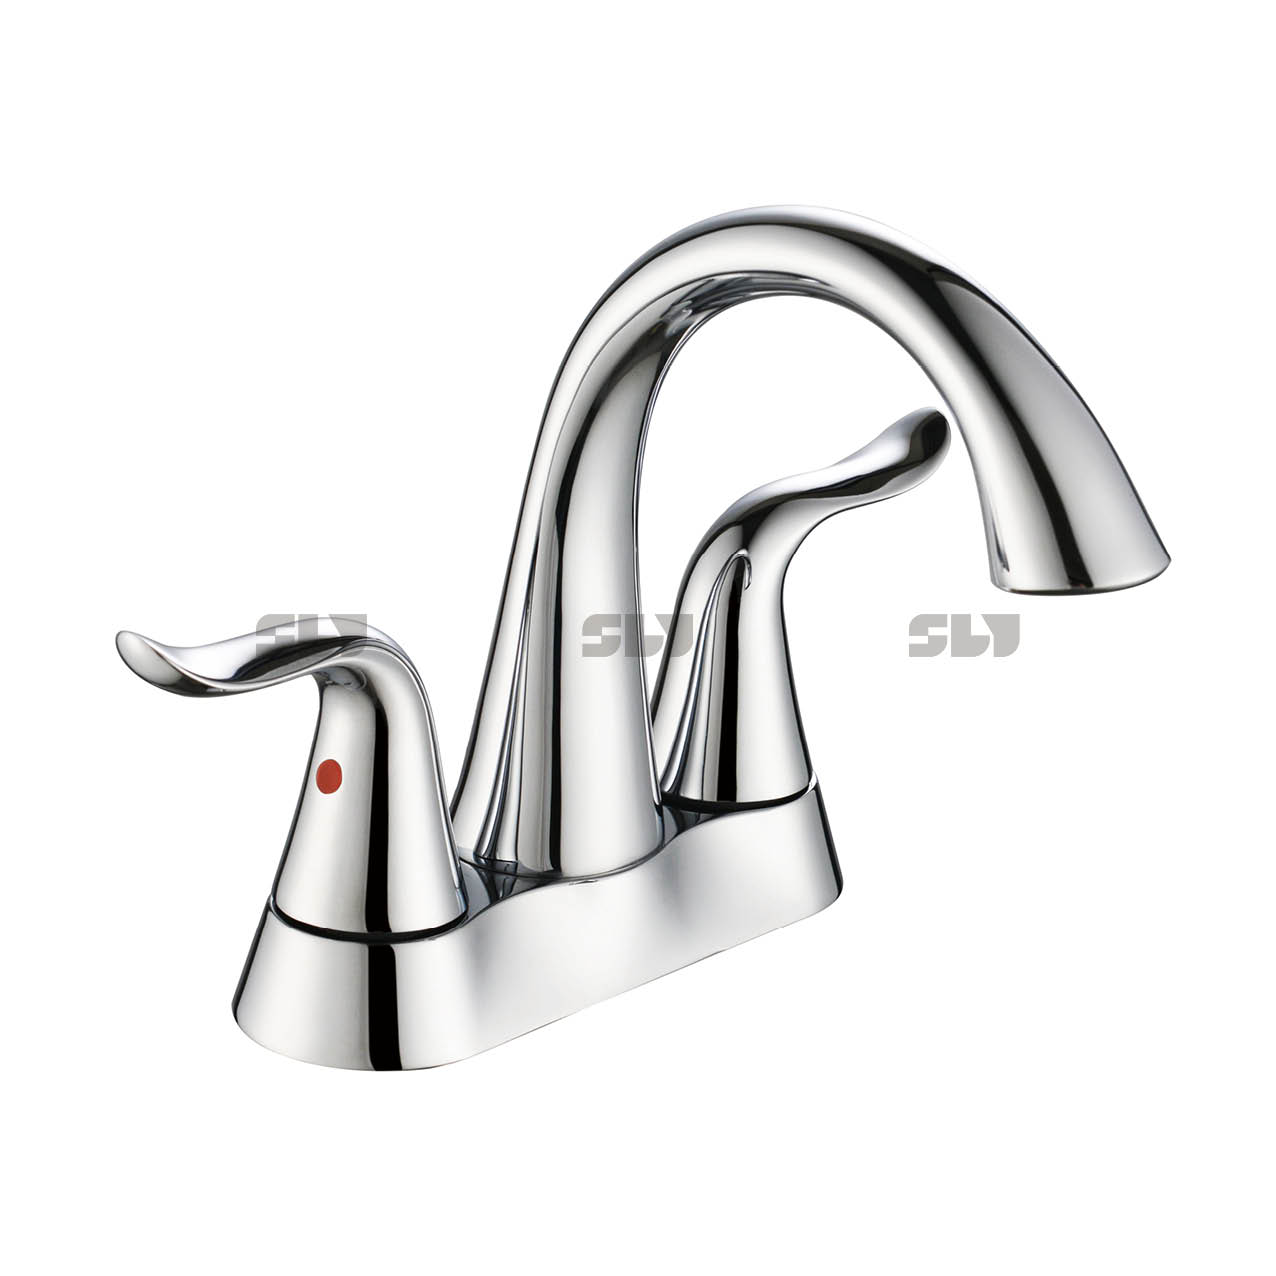 SLY Luxury CUPC Hot Cold Face Basin Faucet Deck Mounted Black Modern Bathroom Faucets